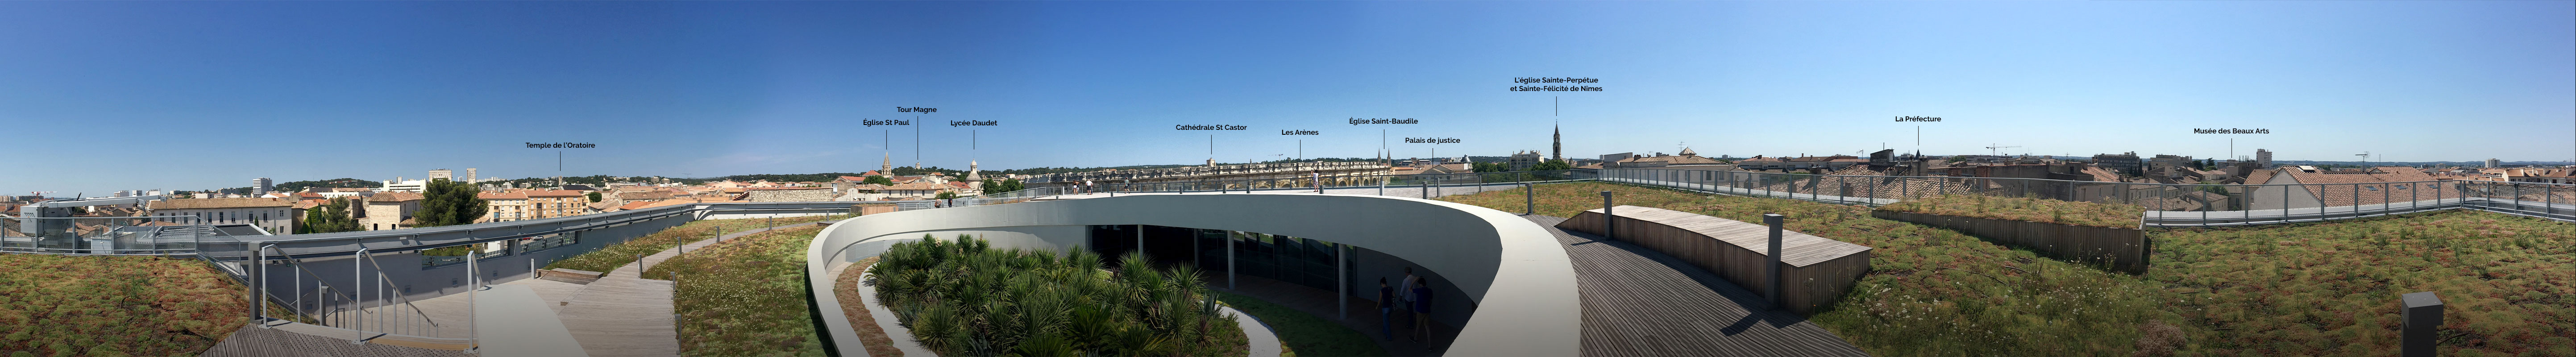 panoramic view of Nîmes and its surroundings from the roof terrace of the Musée de la Romanité